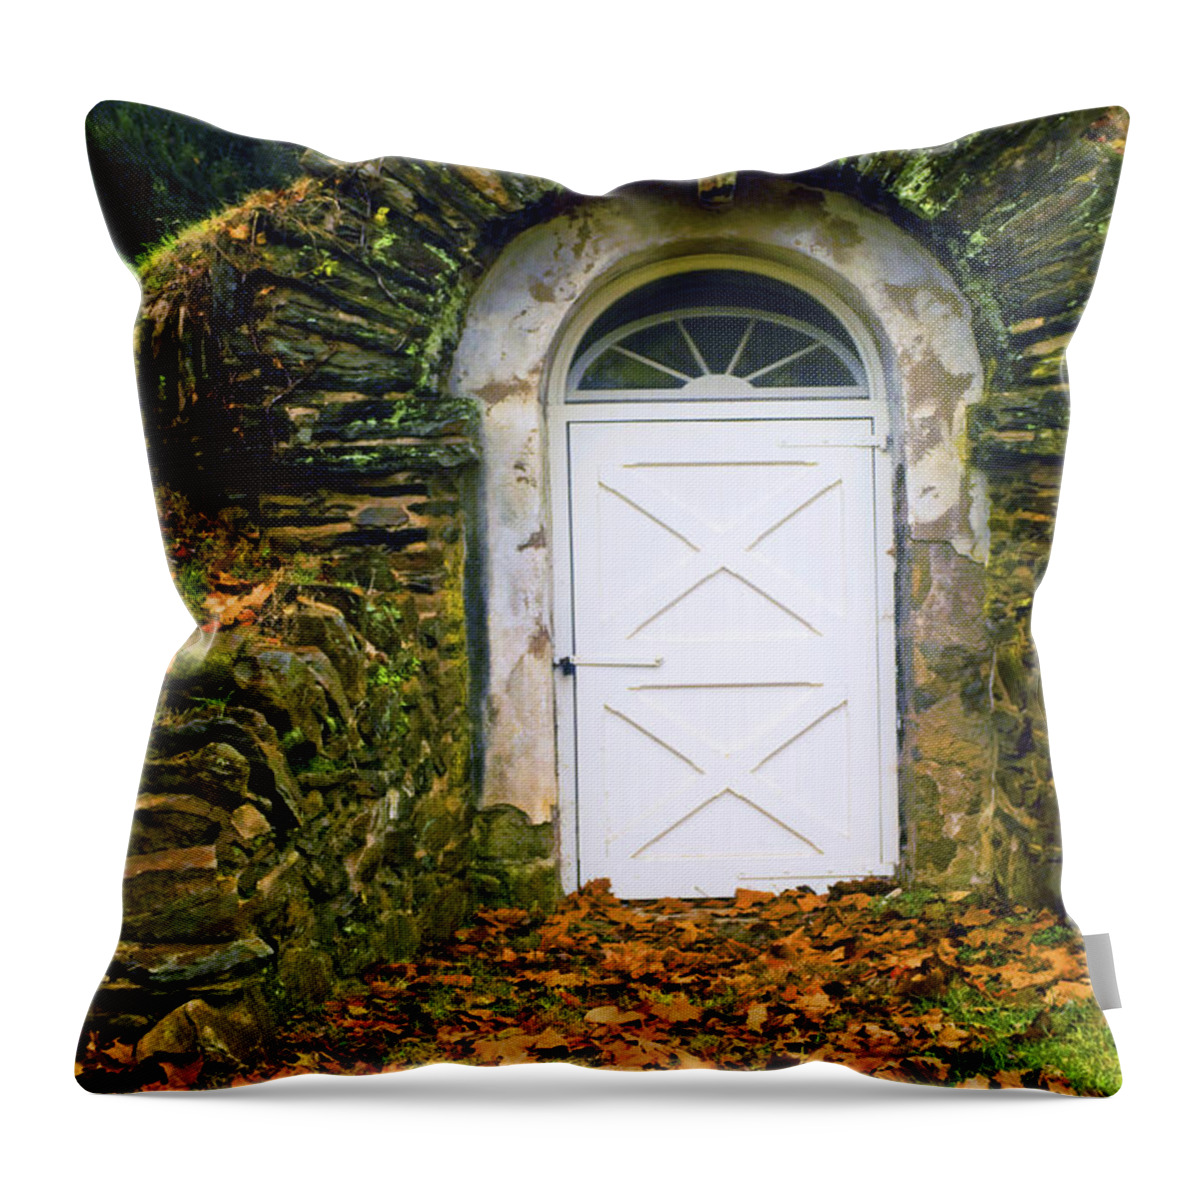 Early American Throw Pillow featuring the photograph Spring House by Paul W Faust - Impressions of Light